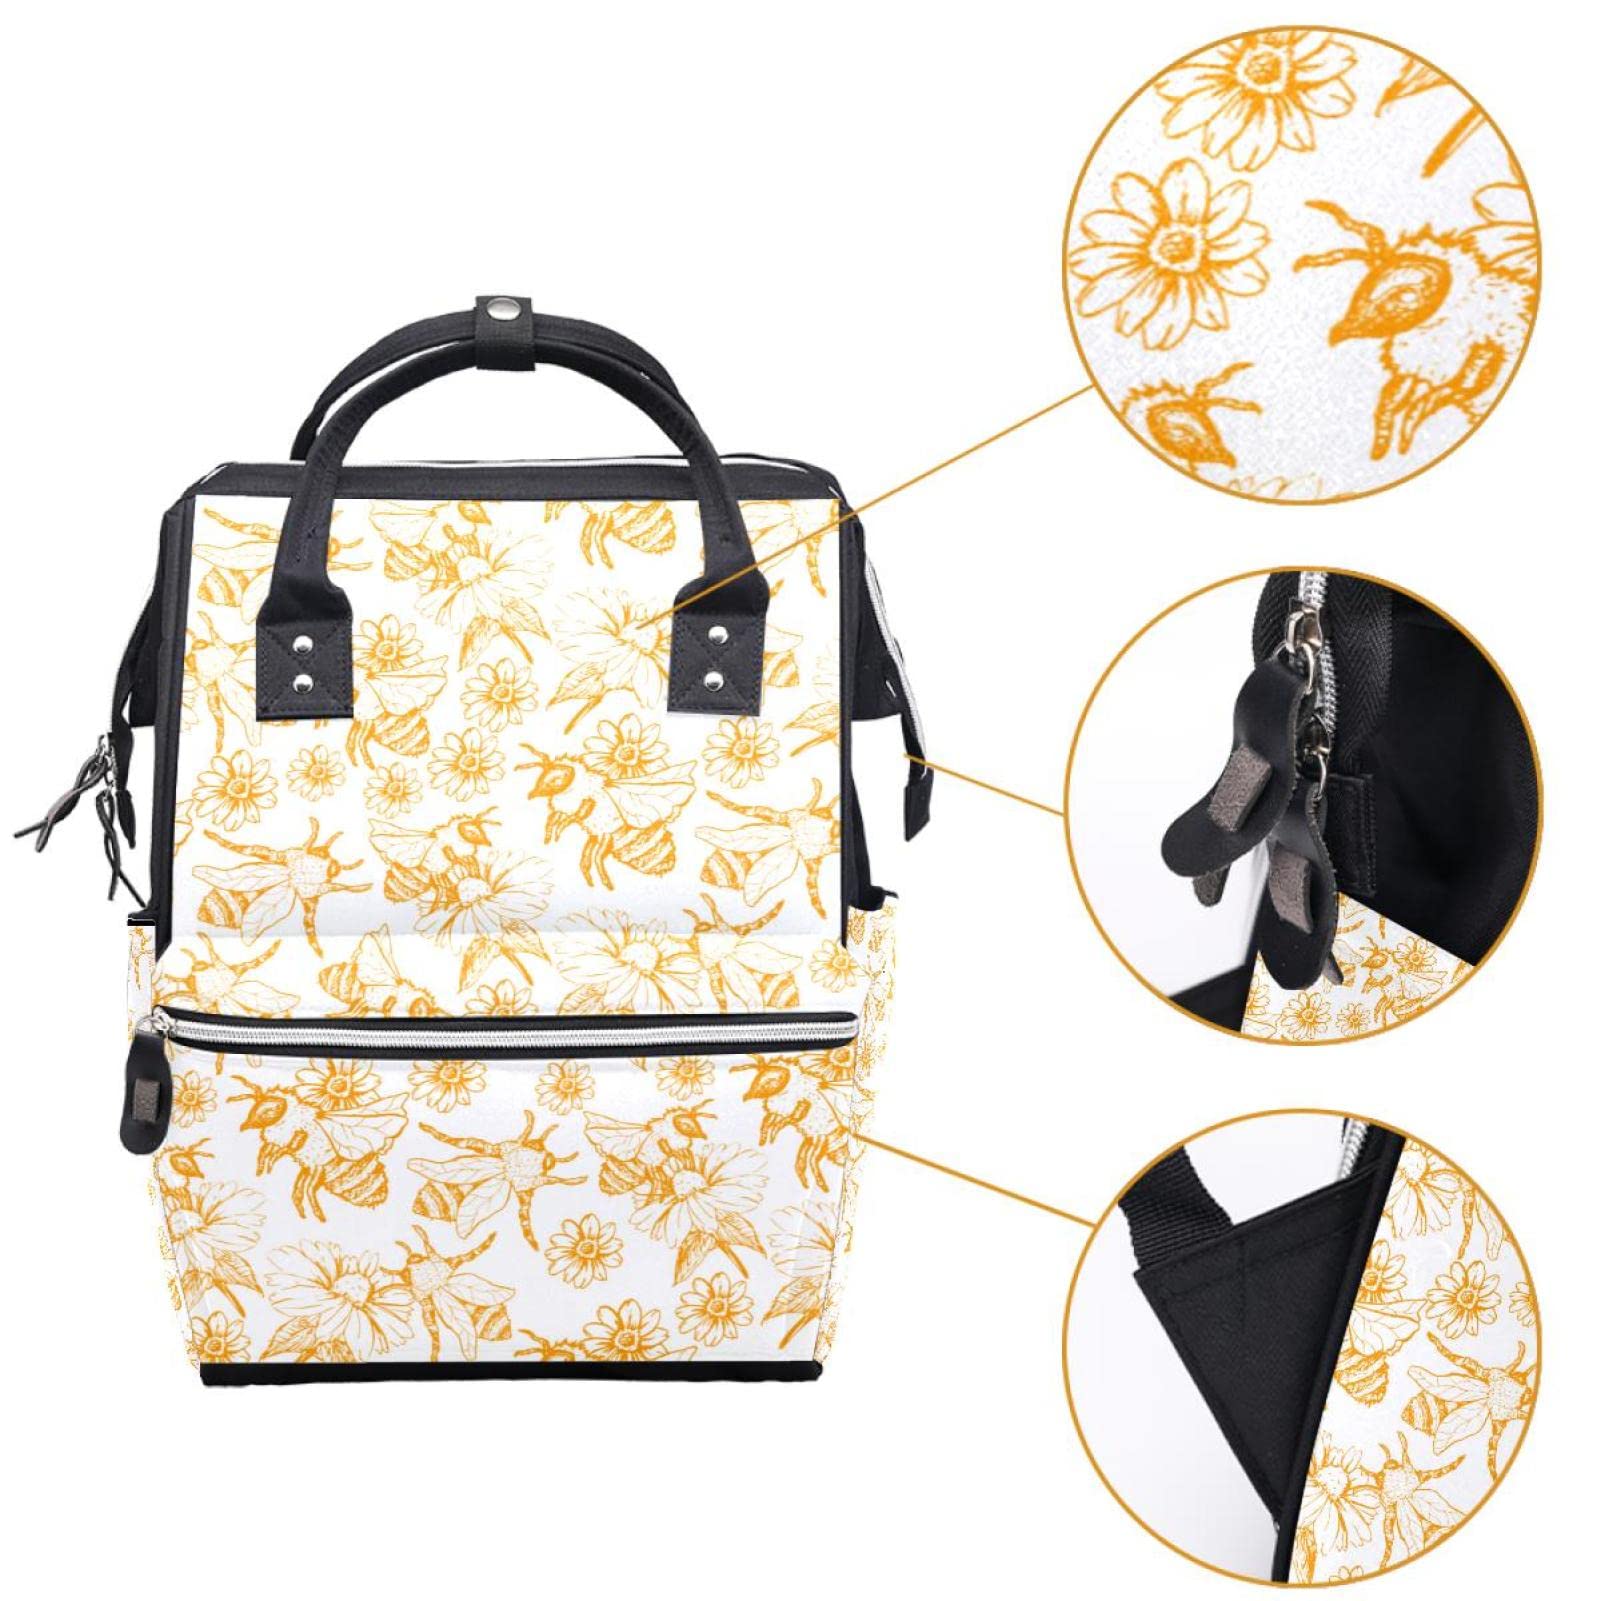 Ofdojg Honey Bee Diaper Bag Backpack Baby Nappy Changing Bags Multi Function Large Capacity Travel Bag